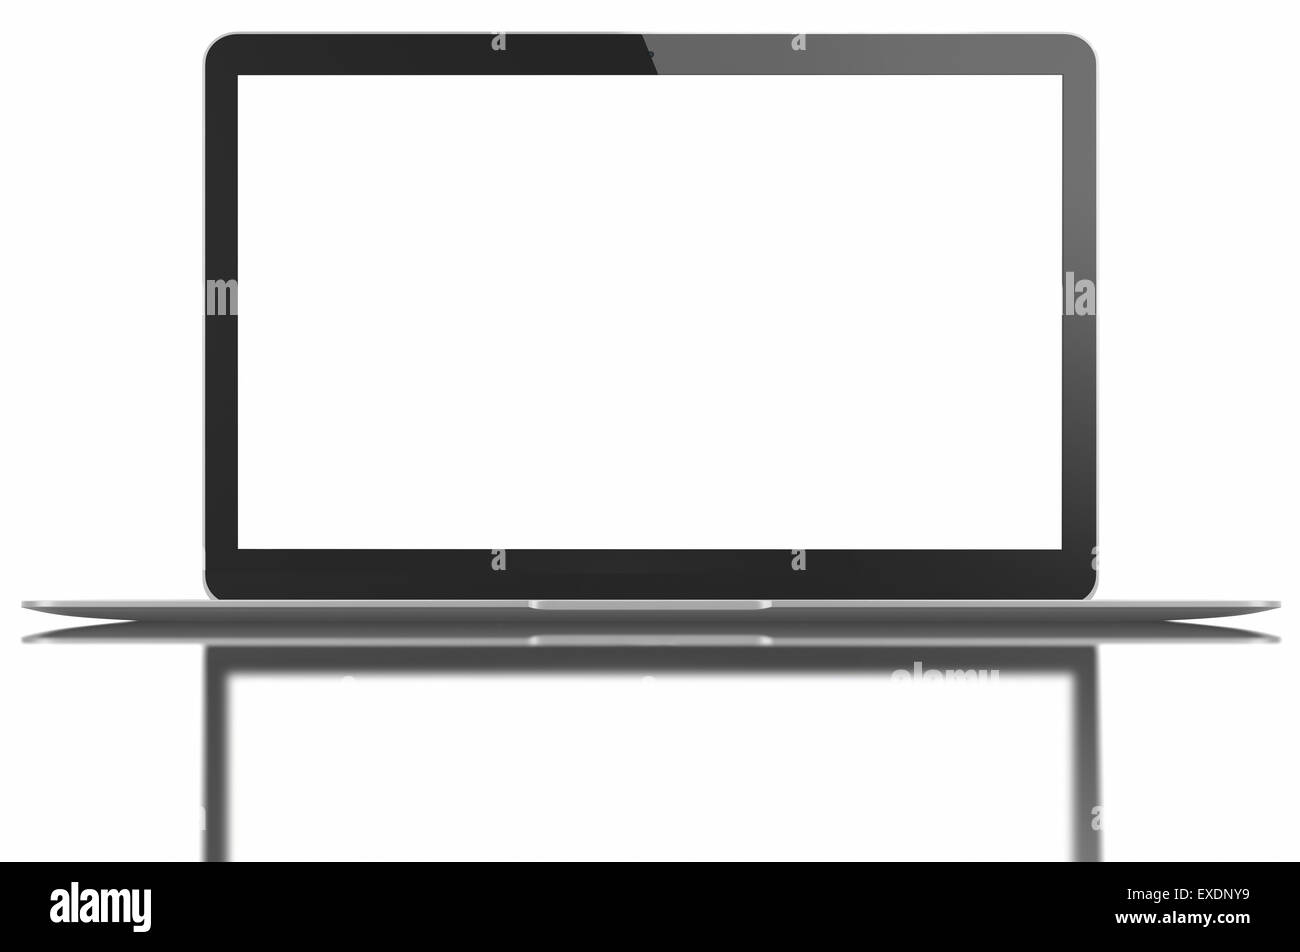 The new Laptop thinner and lighter with blank white screen. Isolated on white background Stock Photo